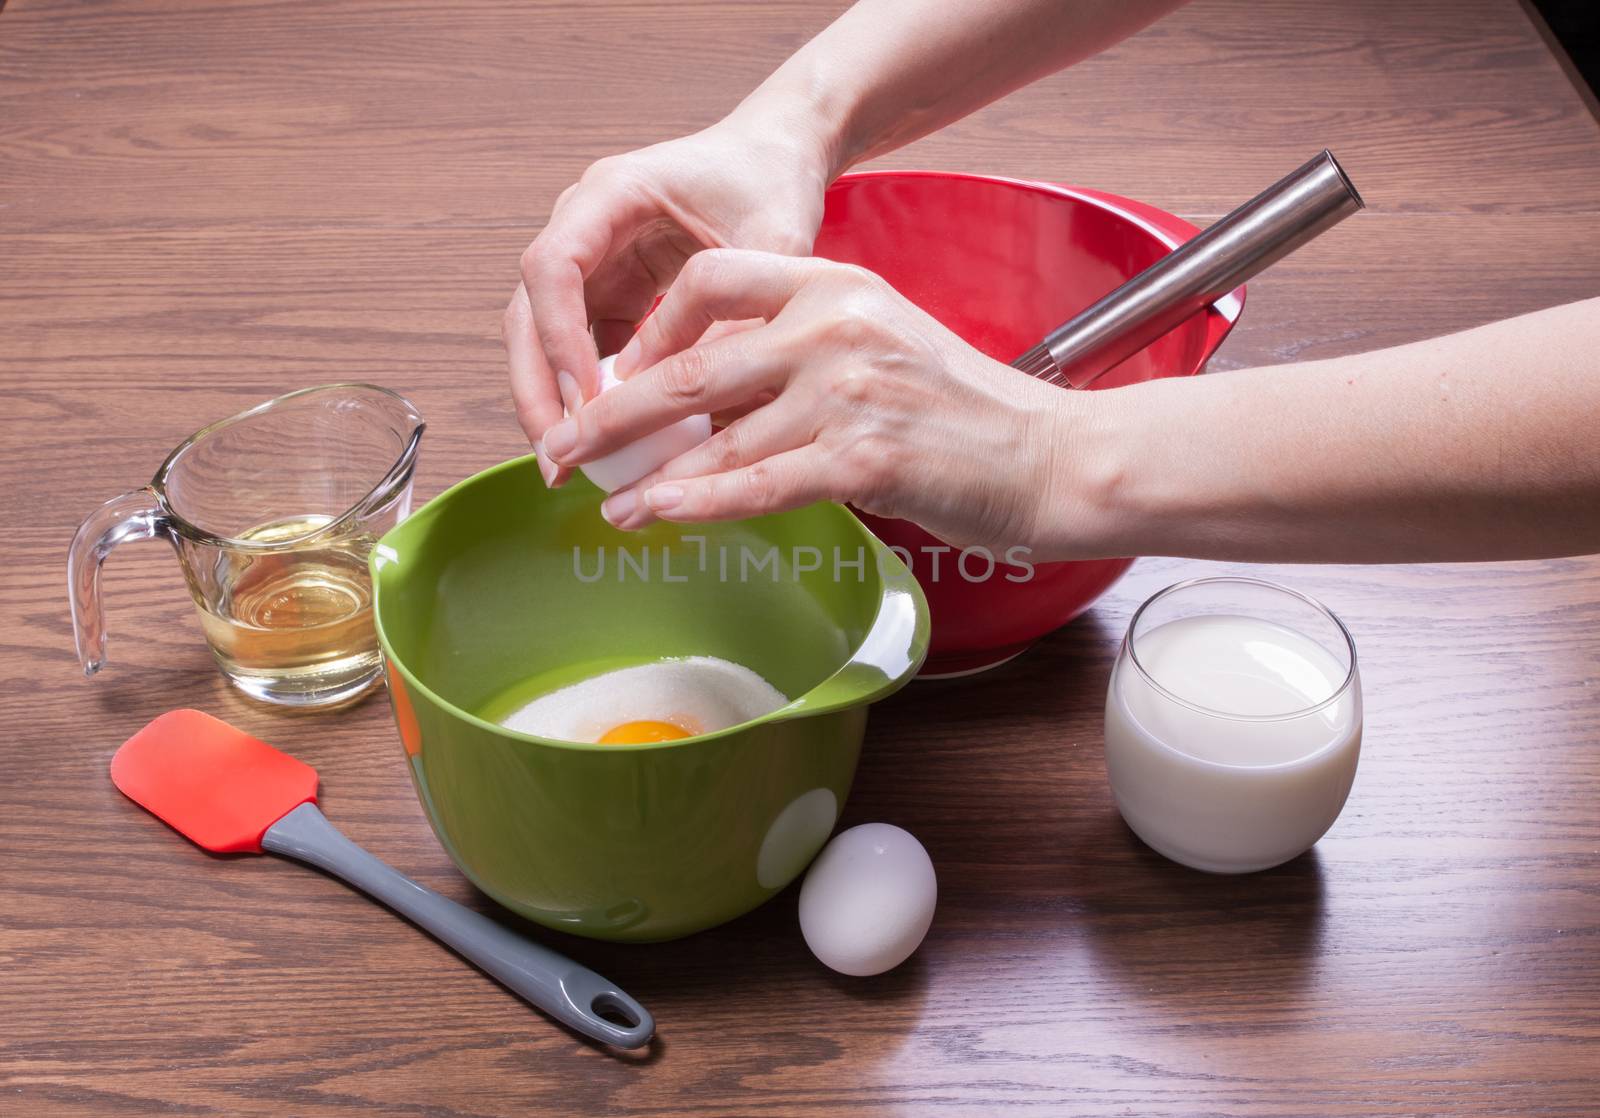 Woman breaking egg in a bowl to cook a homemade cake made from scratch